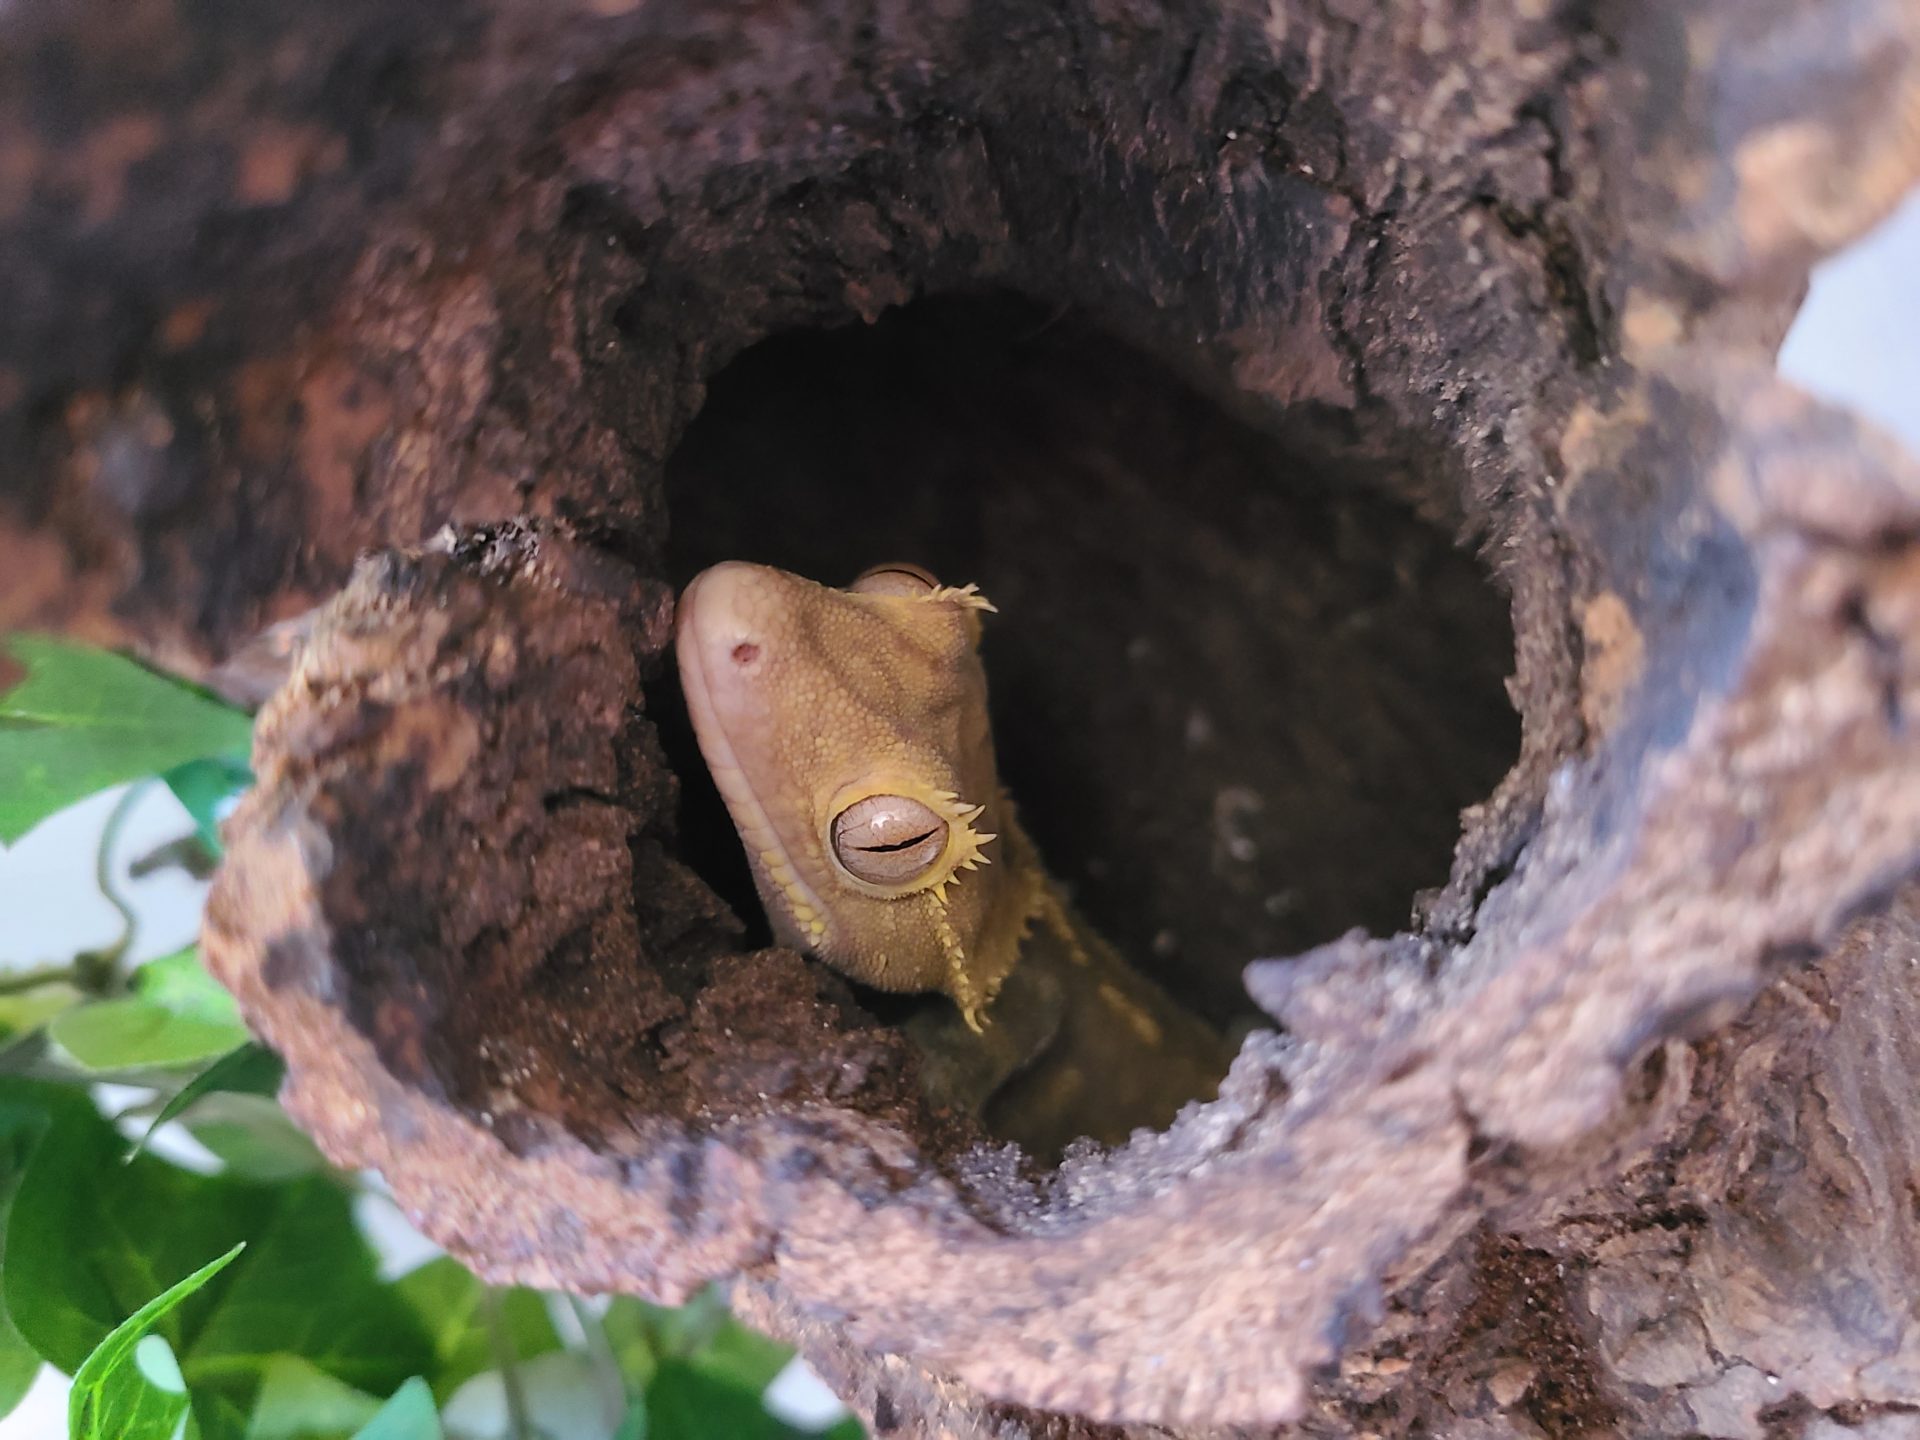 A small tan gecko with its face peeking up out of a hole inside of a wooden log.